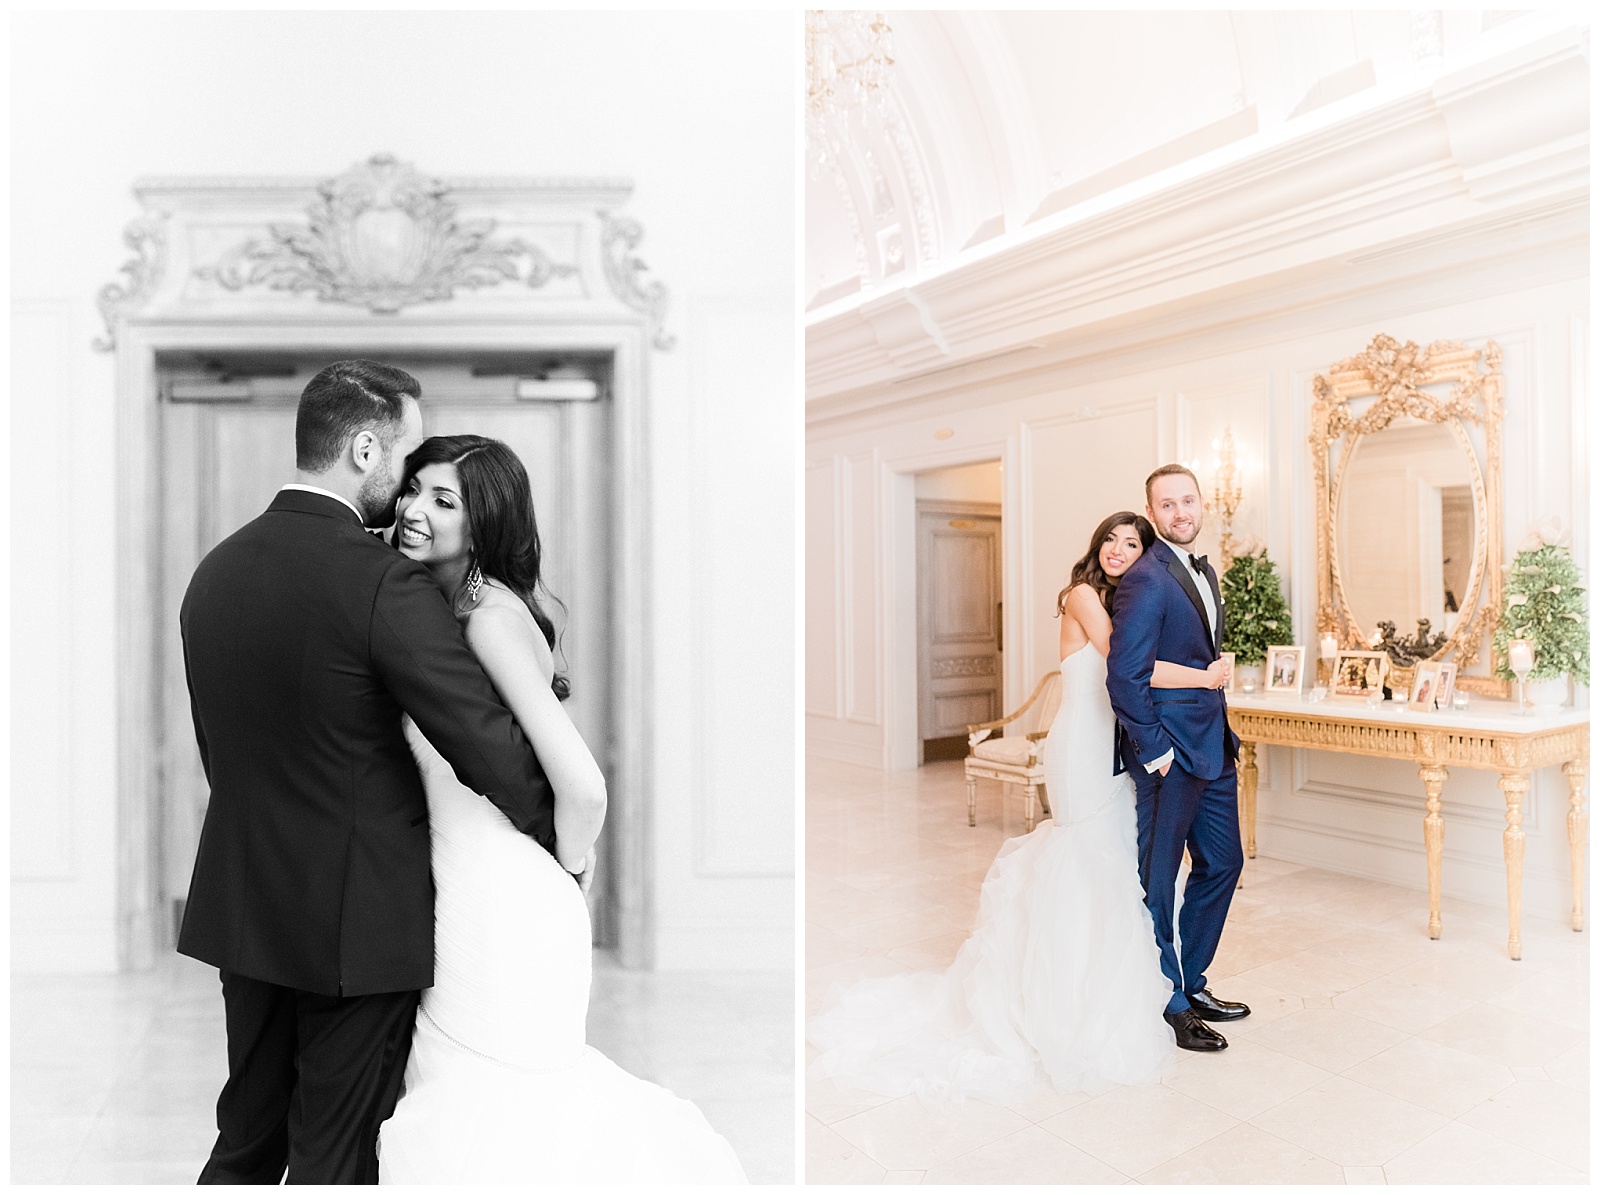 Park Chateau Wedding, Photographer, New Jersey, NJ, Winter, Bride and Groom Portraits, Light and Airy, Hallway, Indoor